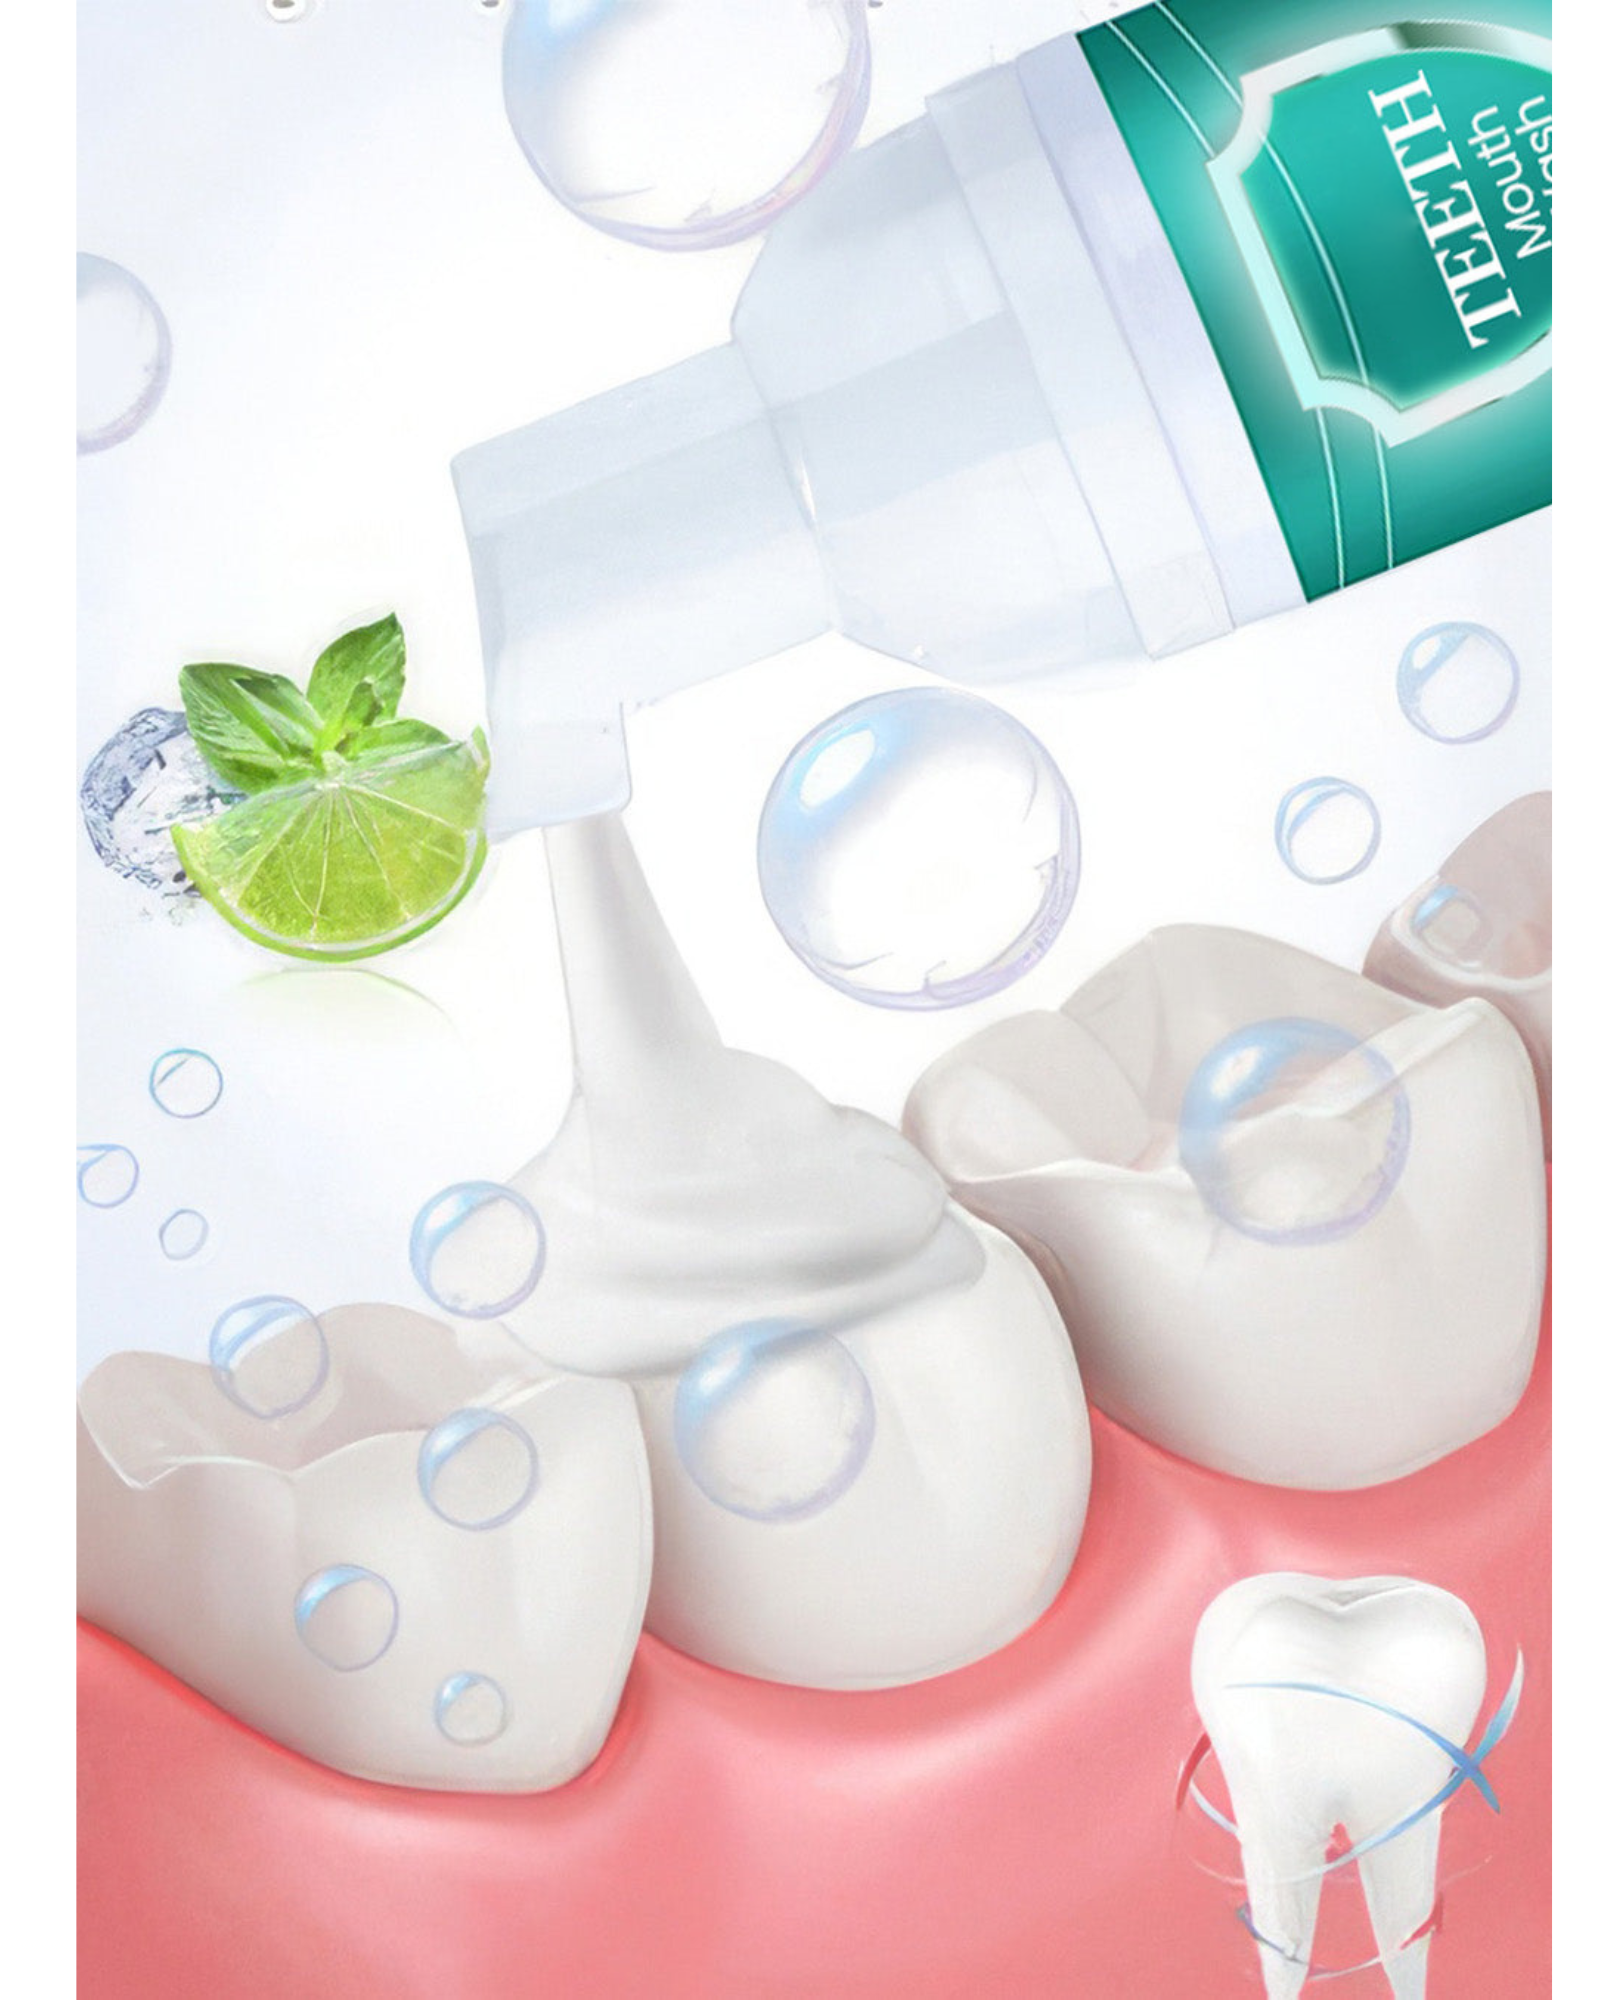 TEETH Herbal Mouthwash - Solve all Oral Problems